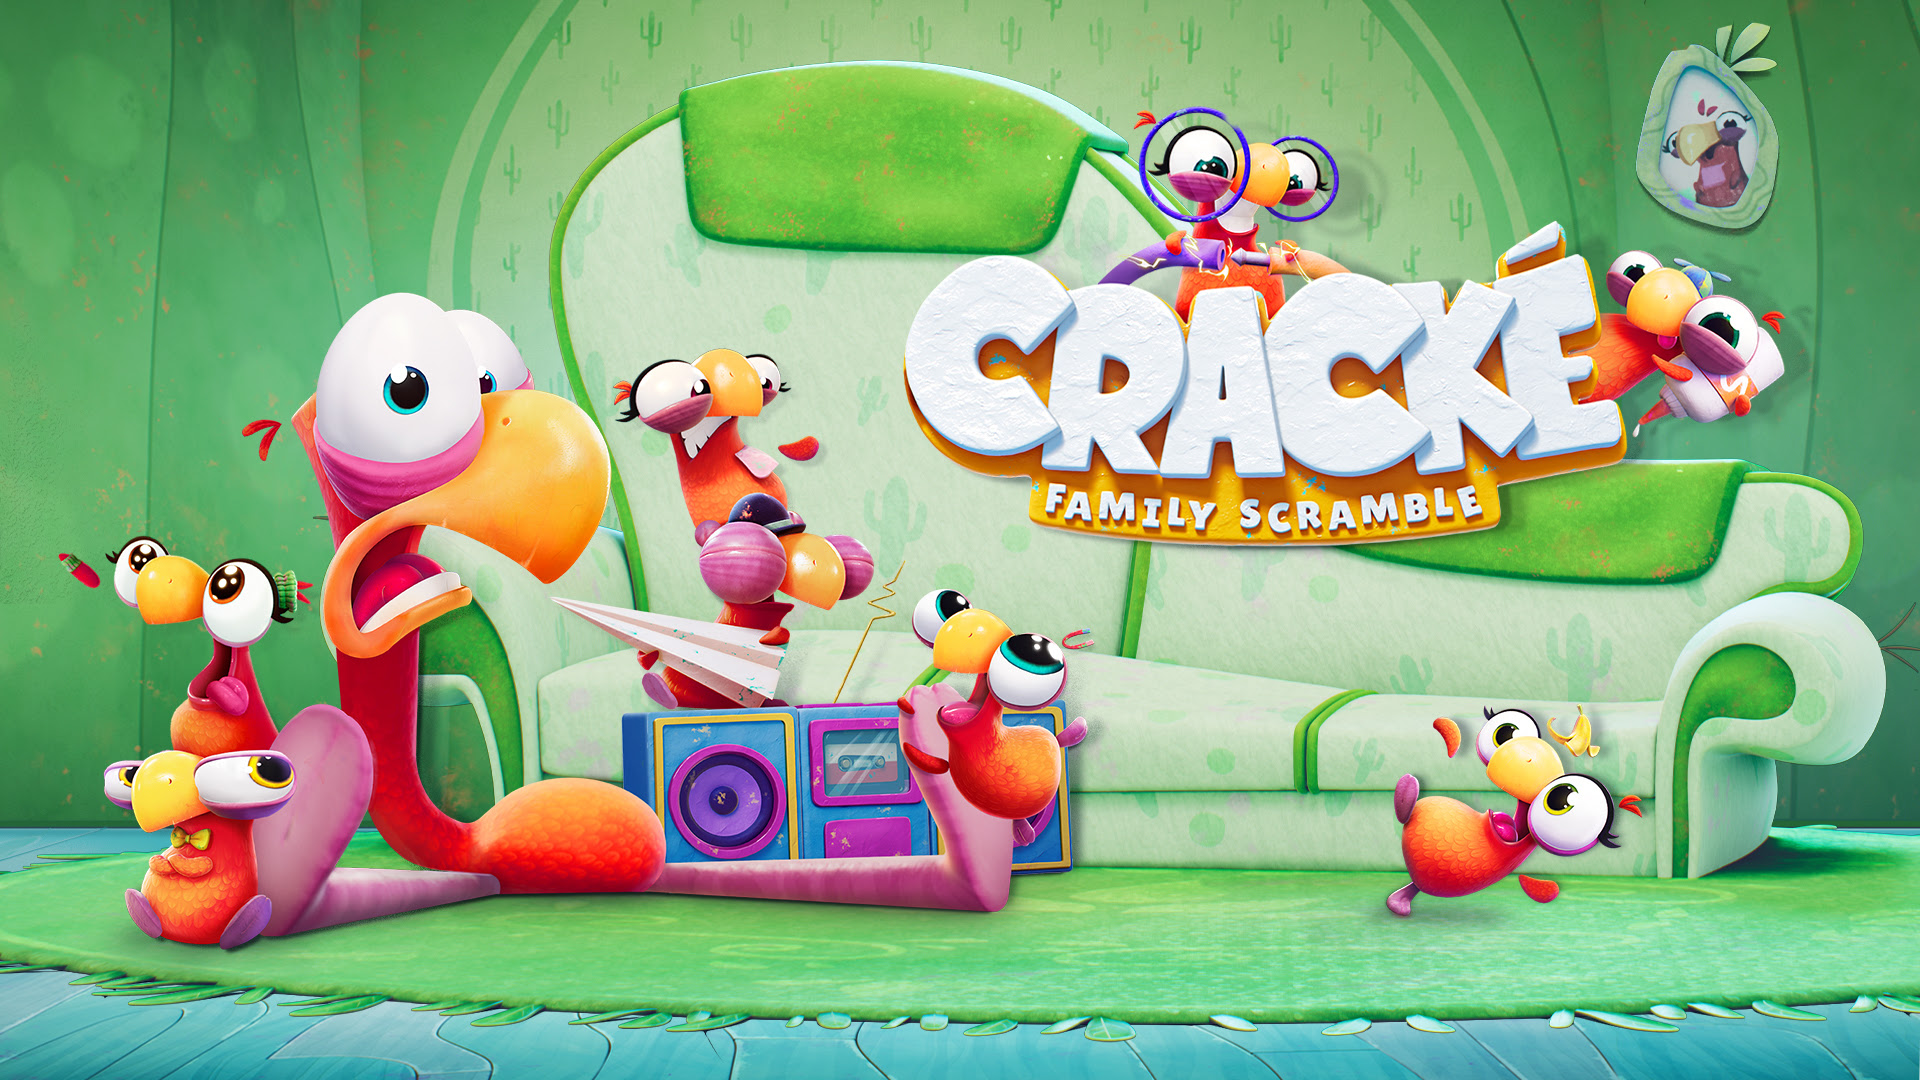 CAKE will distribute the new series Cracké la famille s’explode from Squeeze!